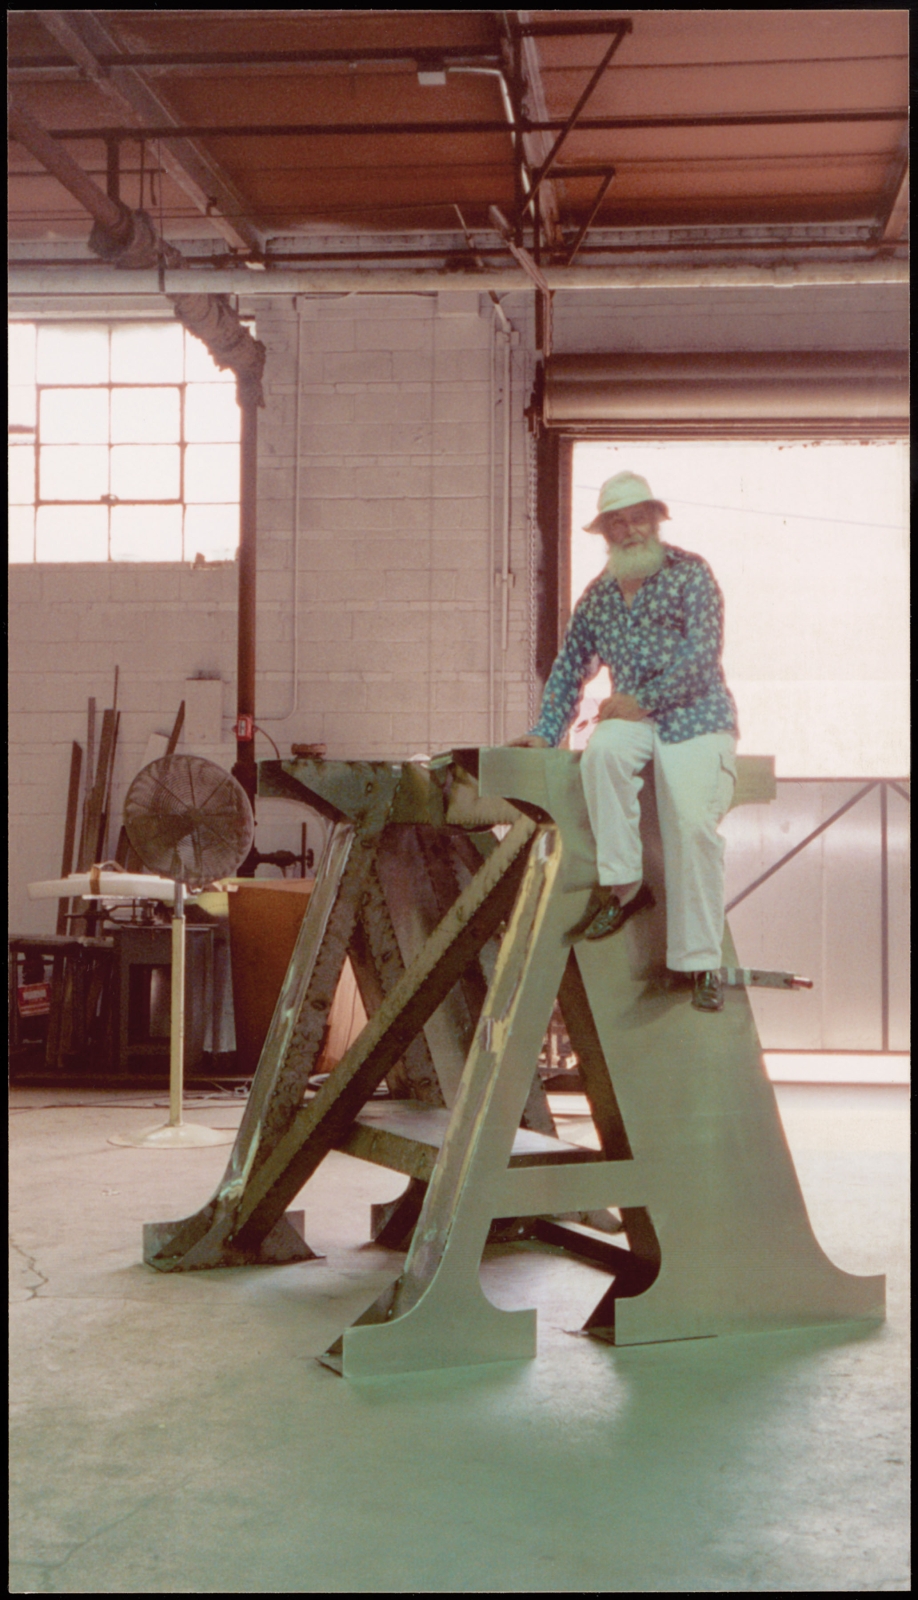 Indiana with a section of The Indiana Obelisk (2002), photographed while the sculpture is being fabricated at Milgo/Bufkin in Brooklyn, New York, 2001